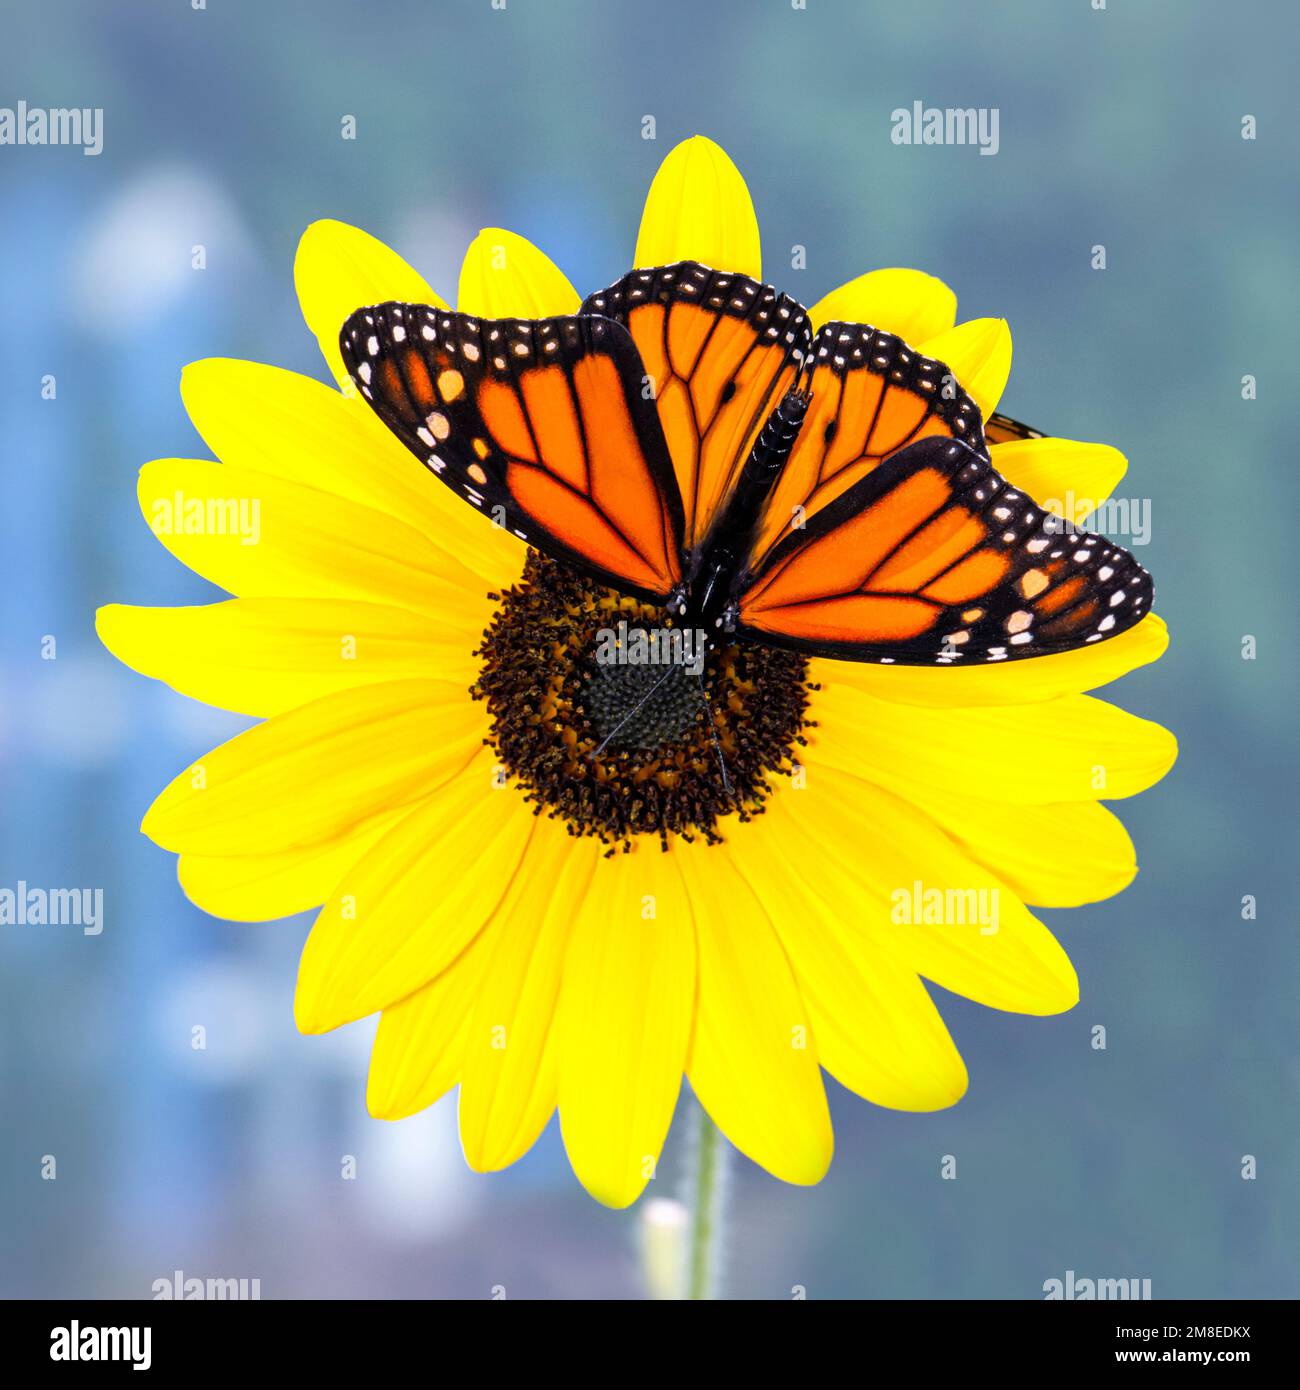 A male monarch butterfly (danaus plexippus) resting on a yellow sunflower (Helianthus) with wings spread. Stock Photo